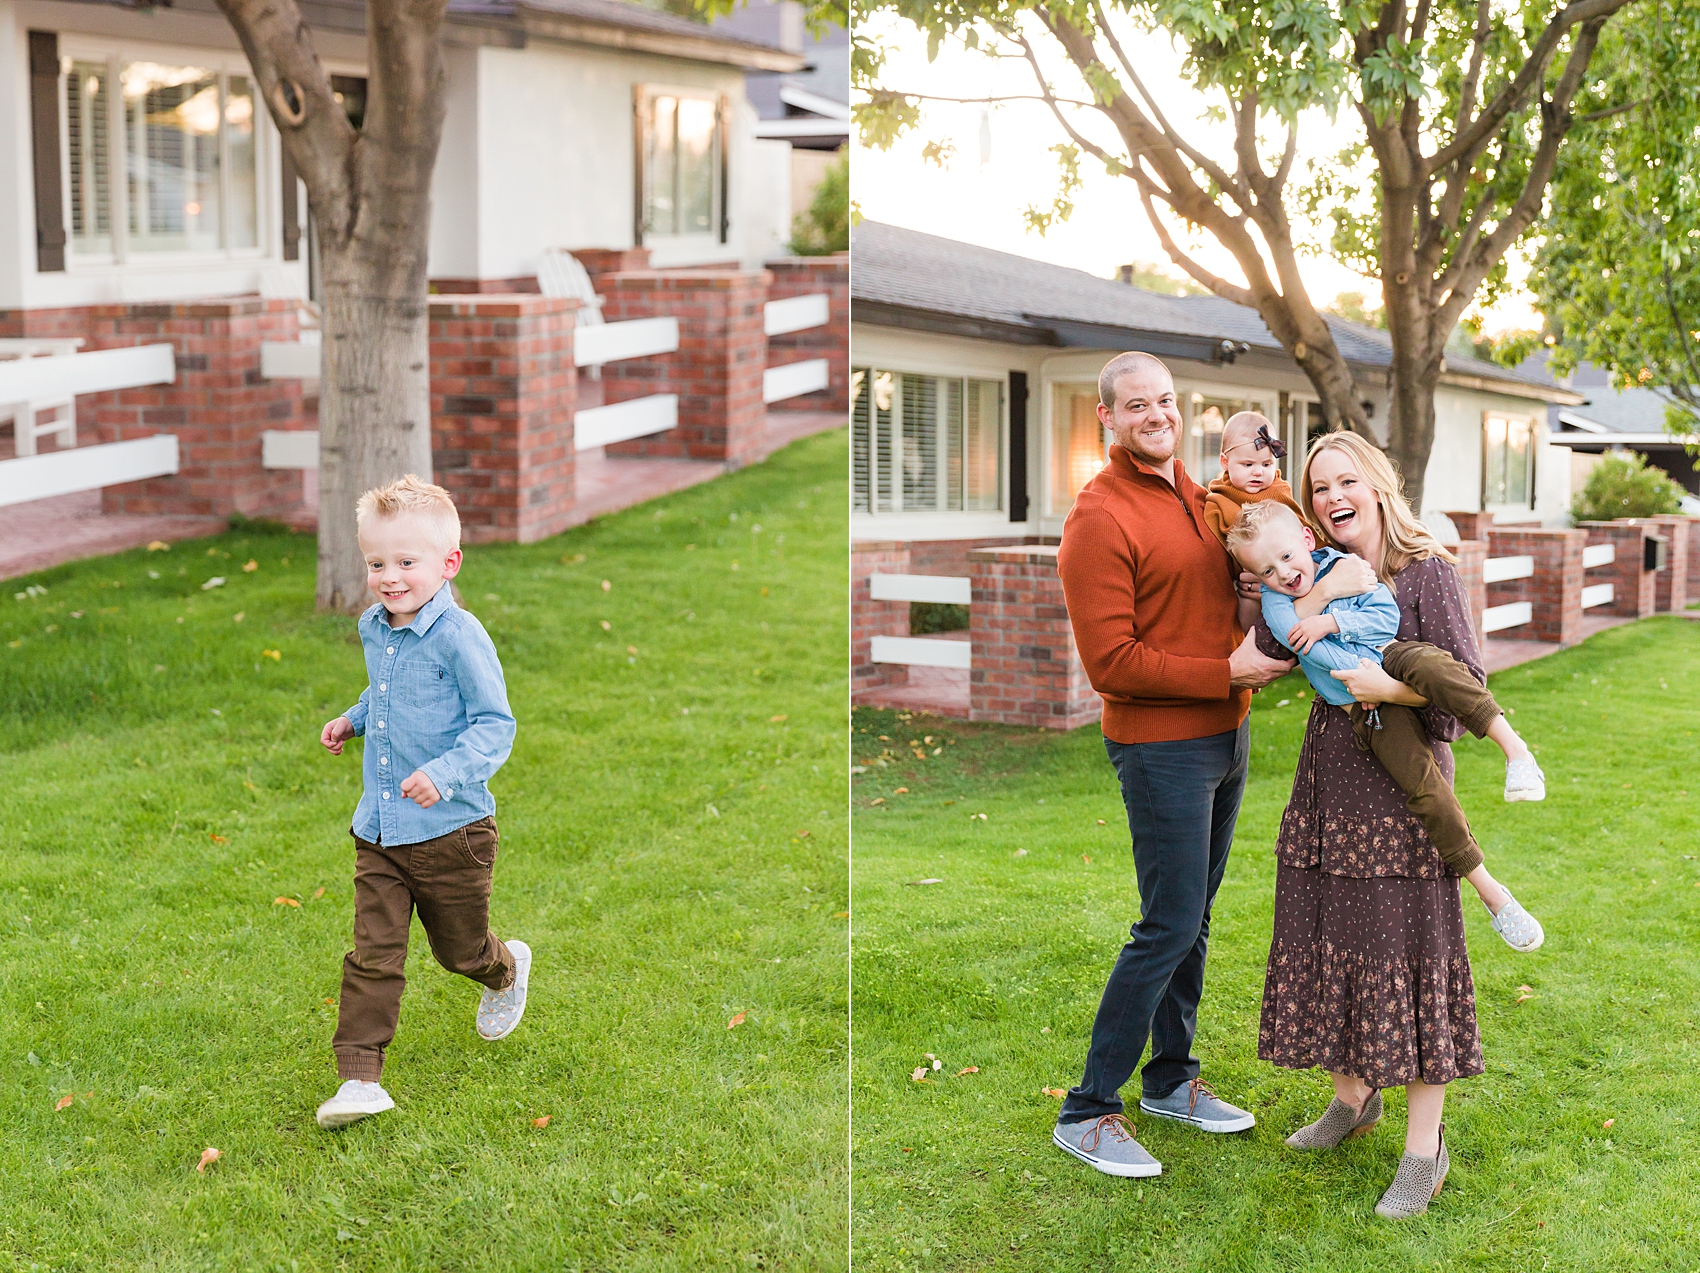 Leah Hope Photography | Scottsdale Phoenix Arizona | Backyard Home Lifestyle Session | Family Pictures | What to Wear